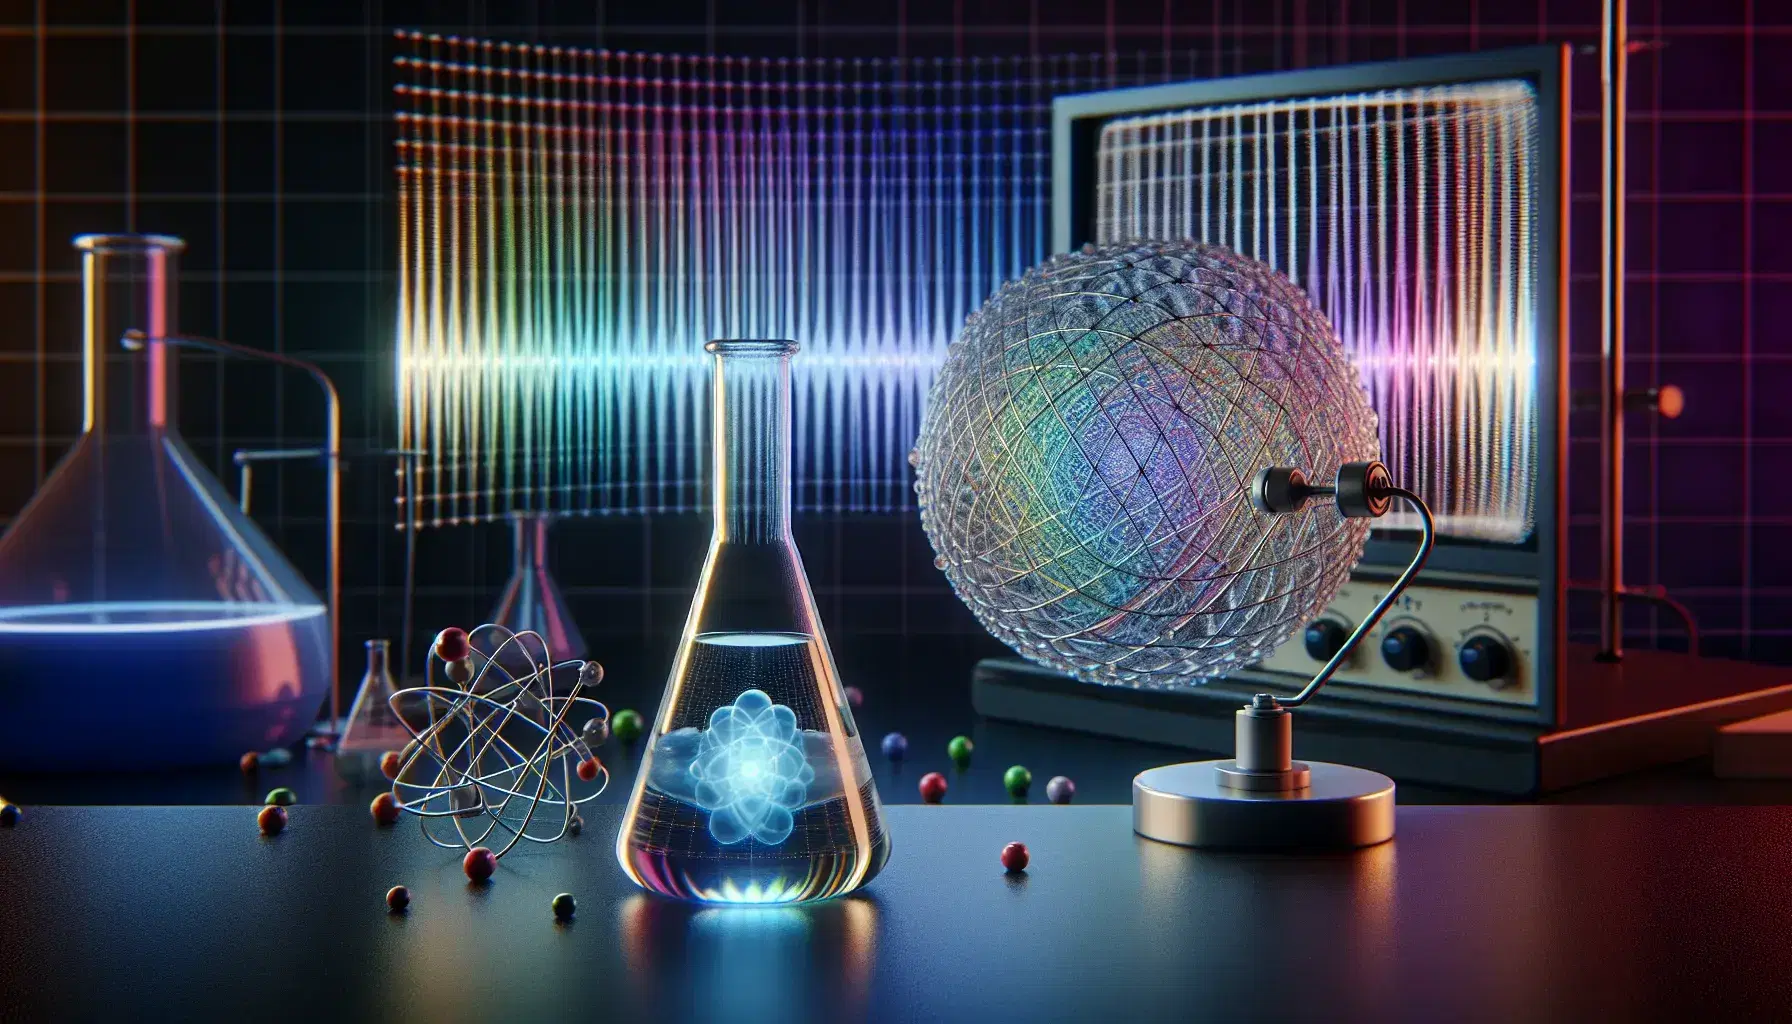 Laboratory scene with a luminescent blue substance in a glass flask, a spectrum of light in the background, and a quantum mechanics monitor display.